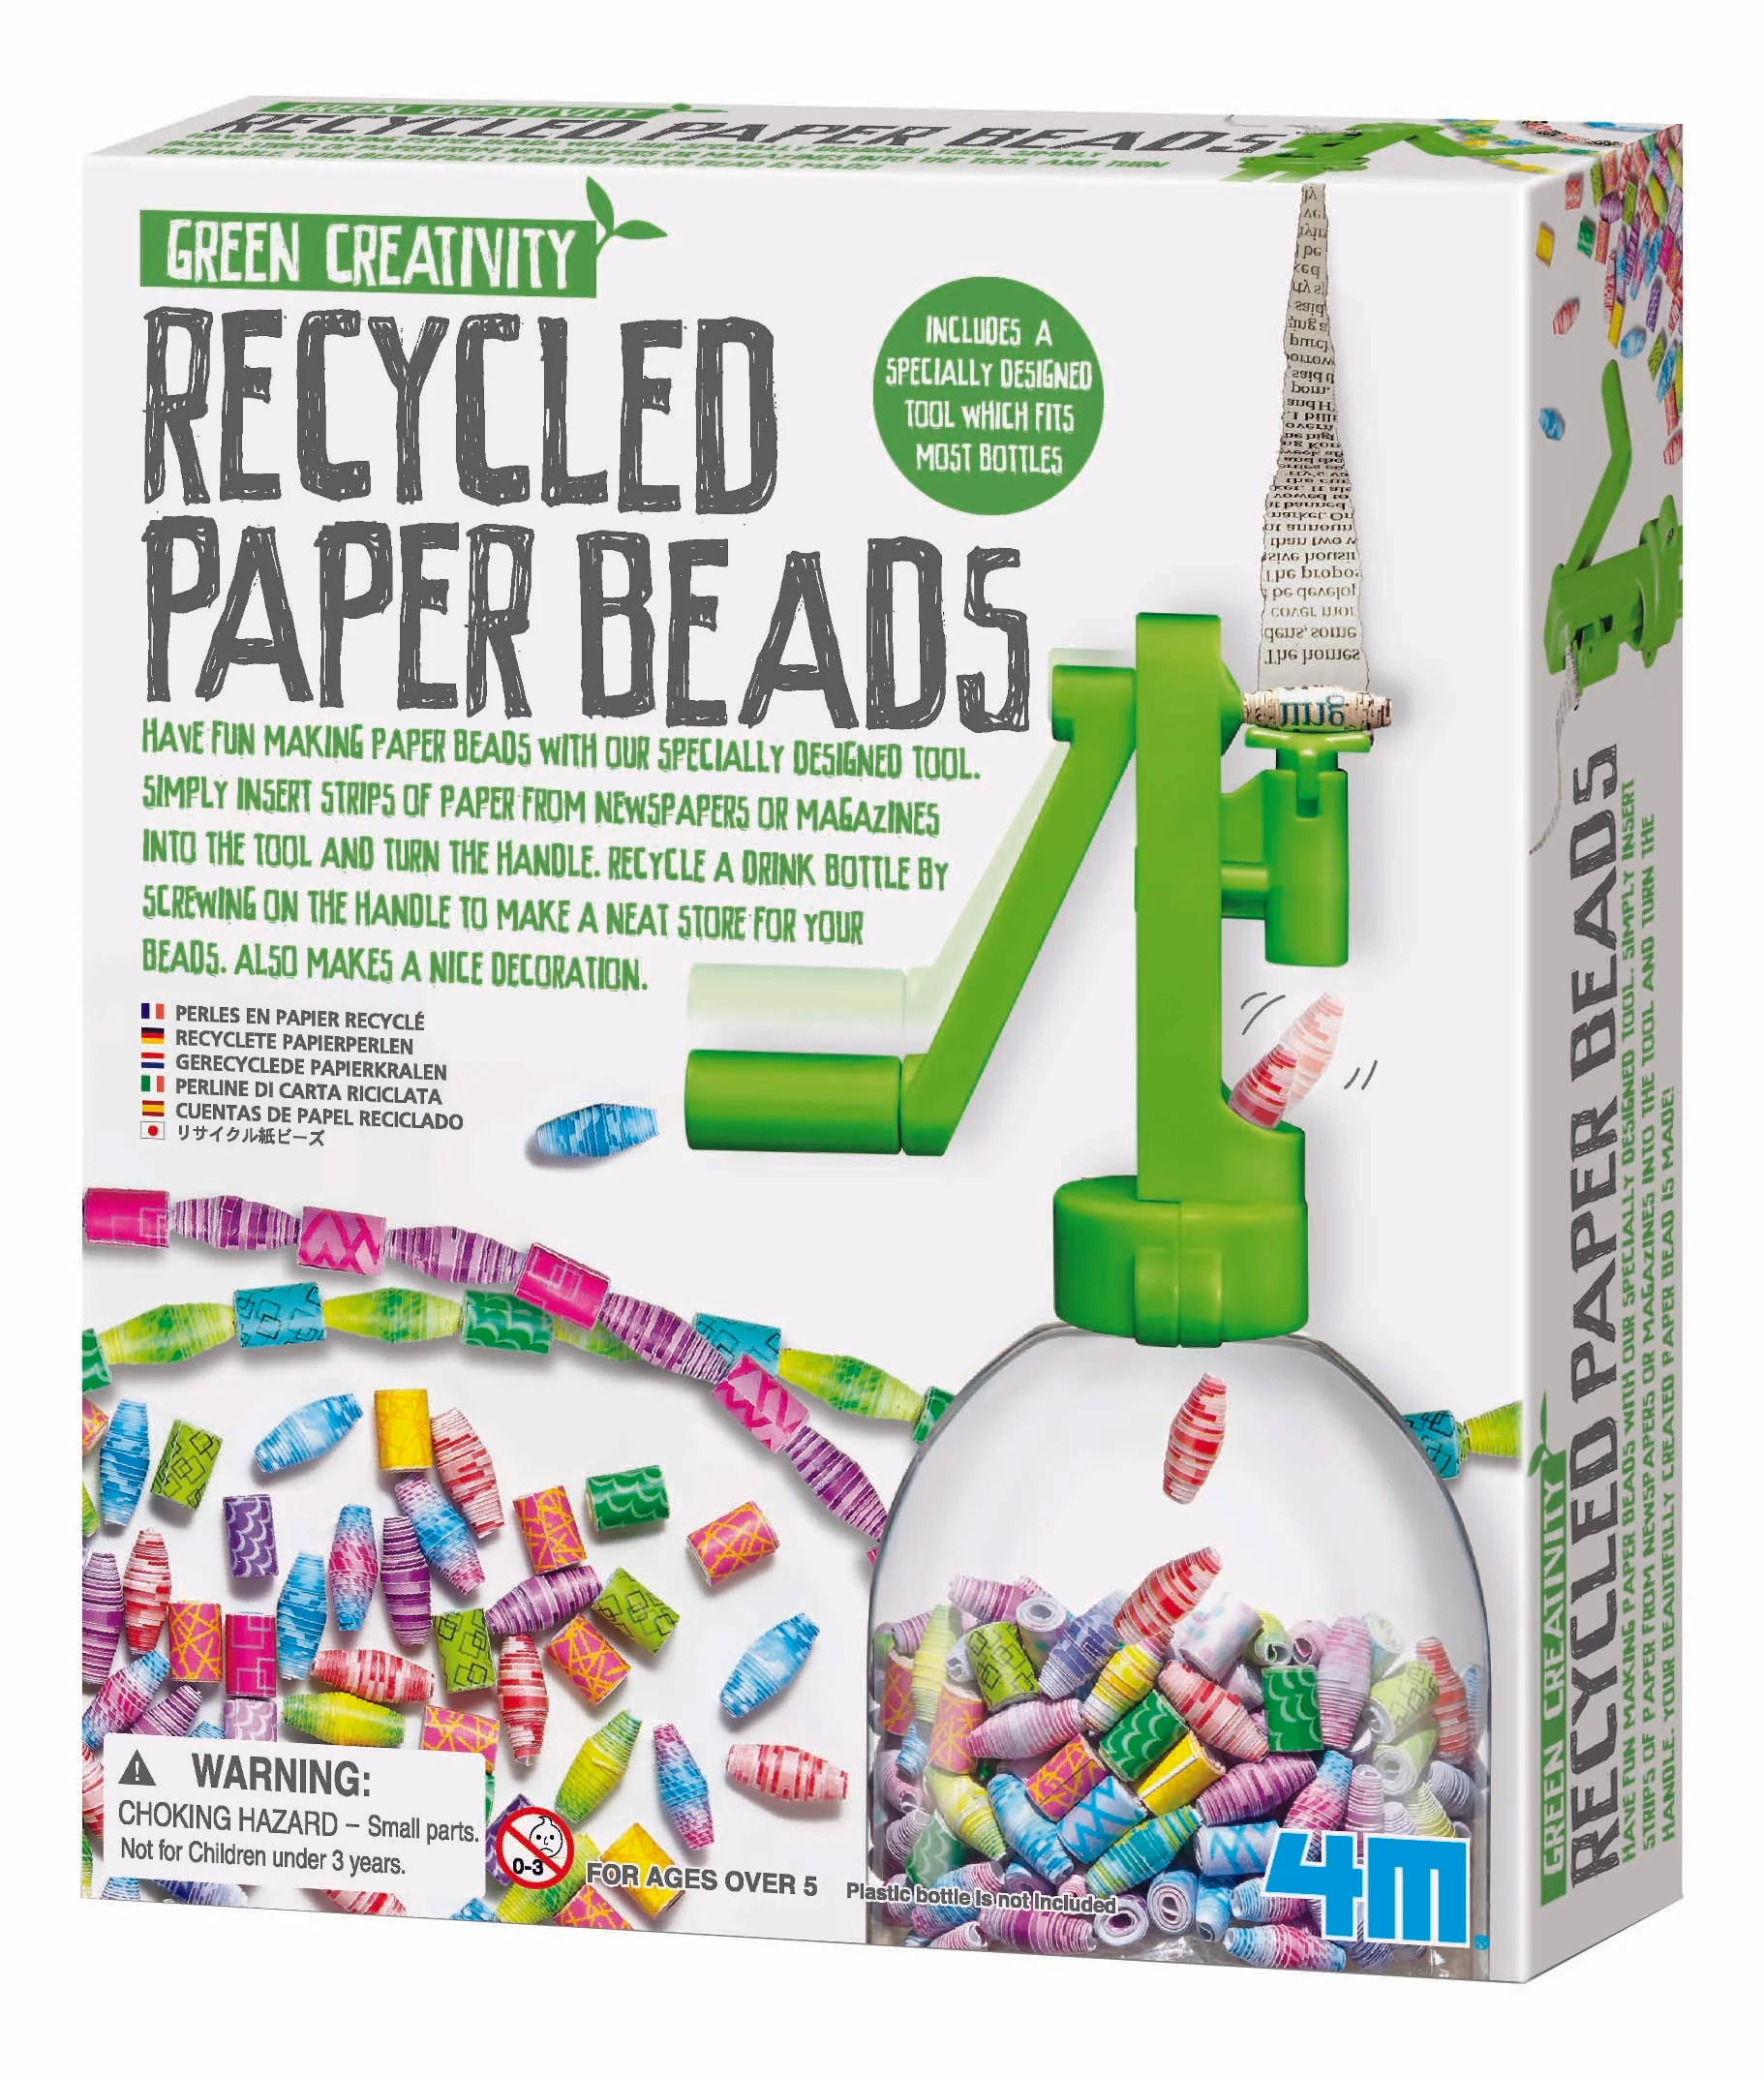 RECYCLED PAPER BEADS